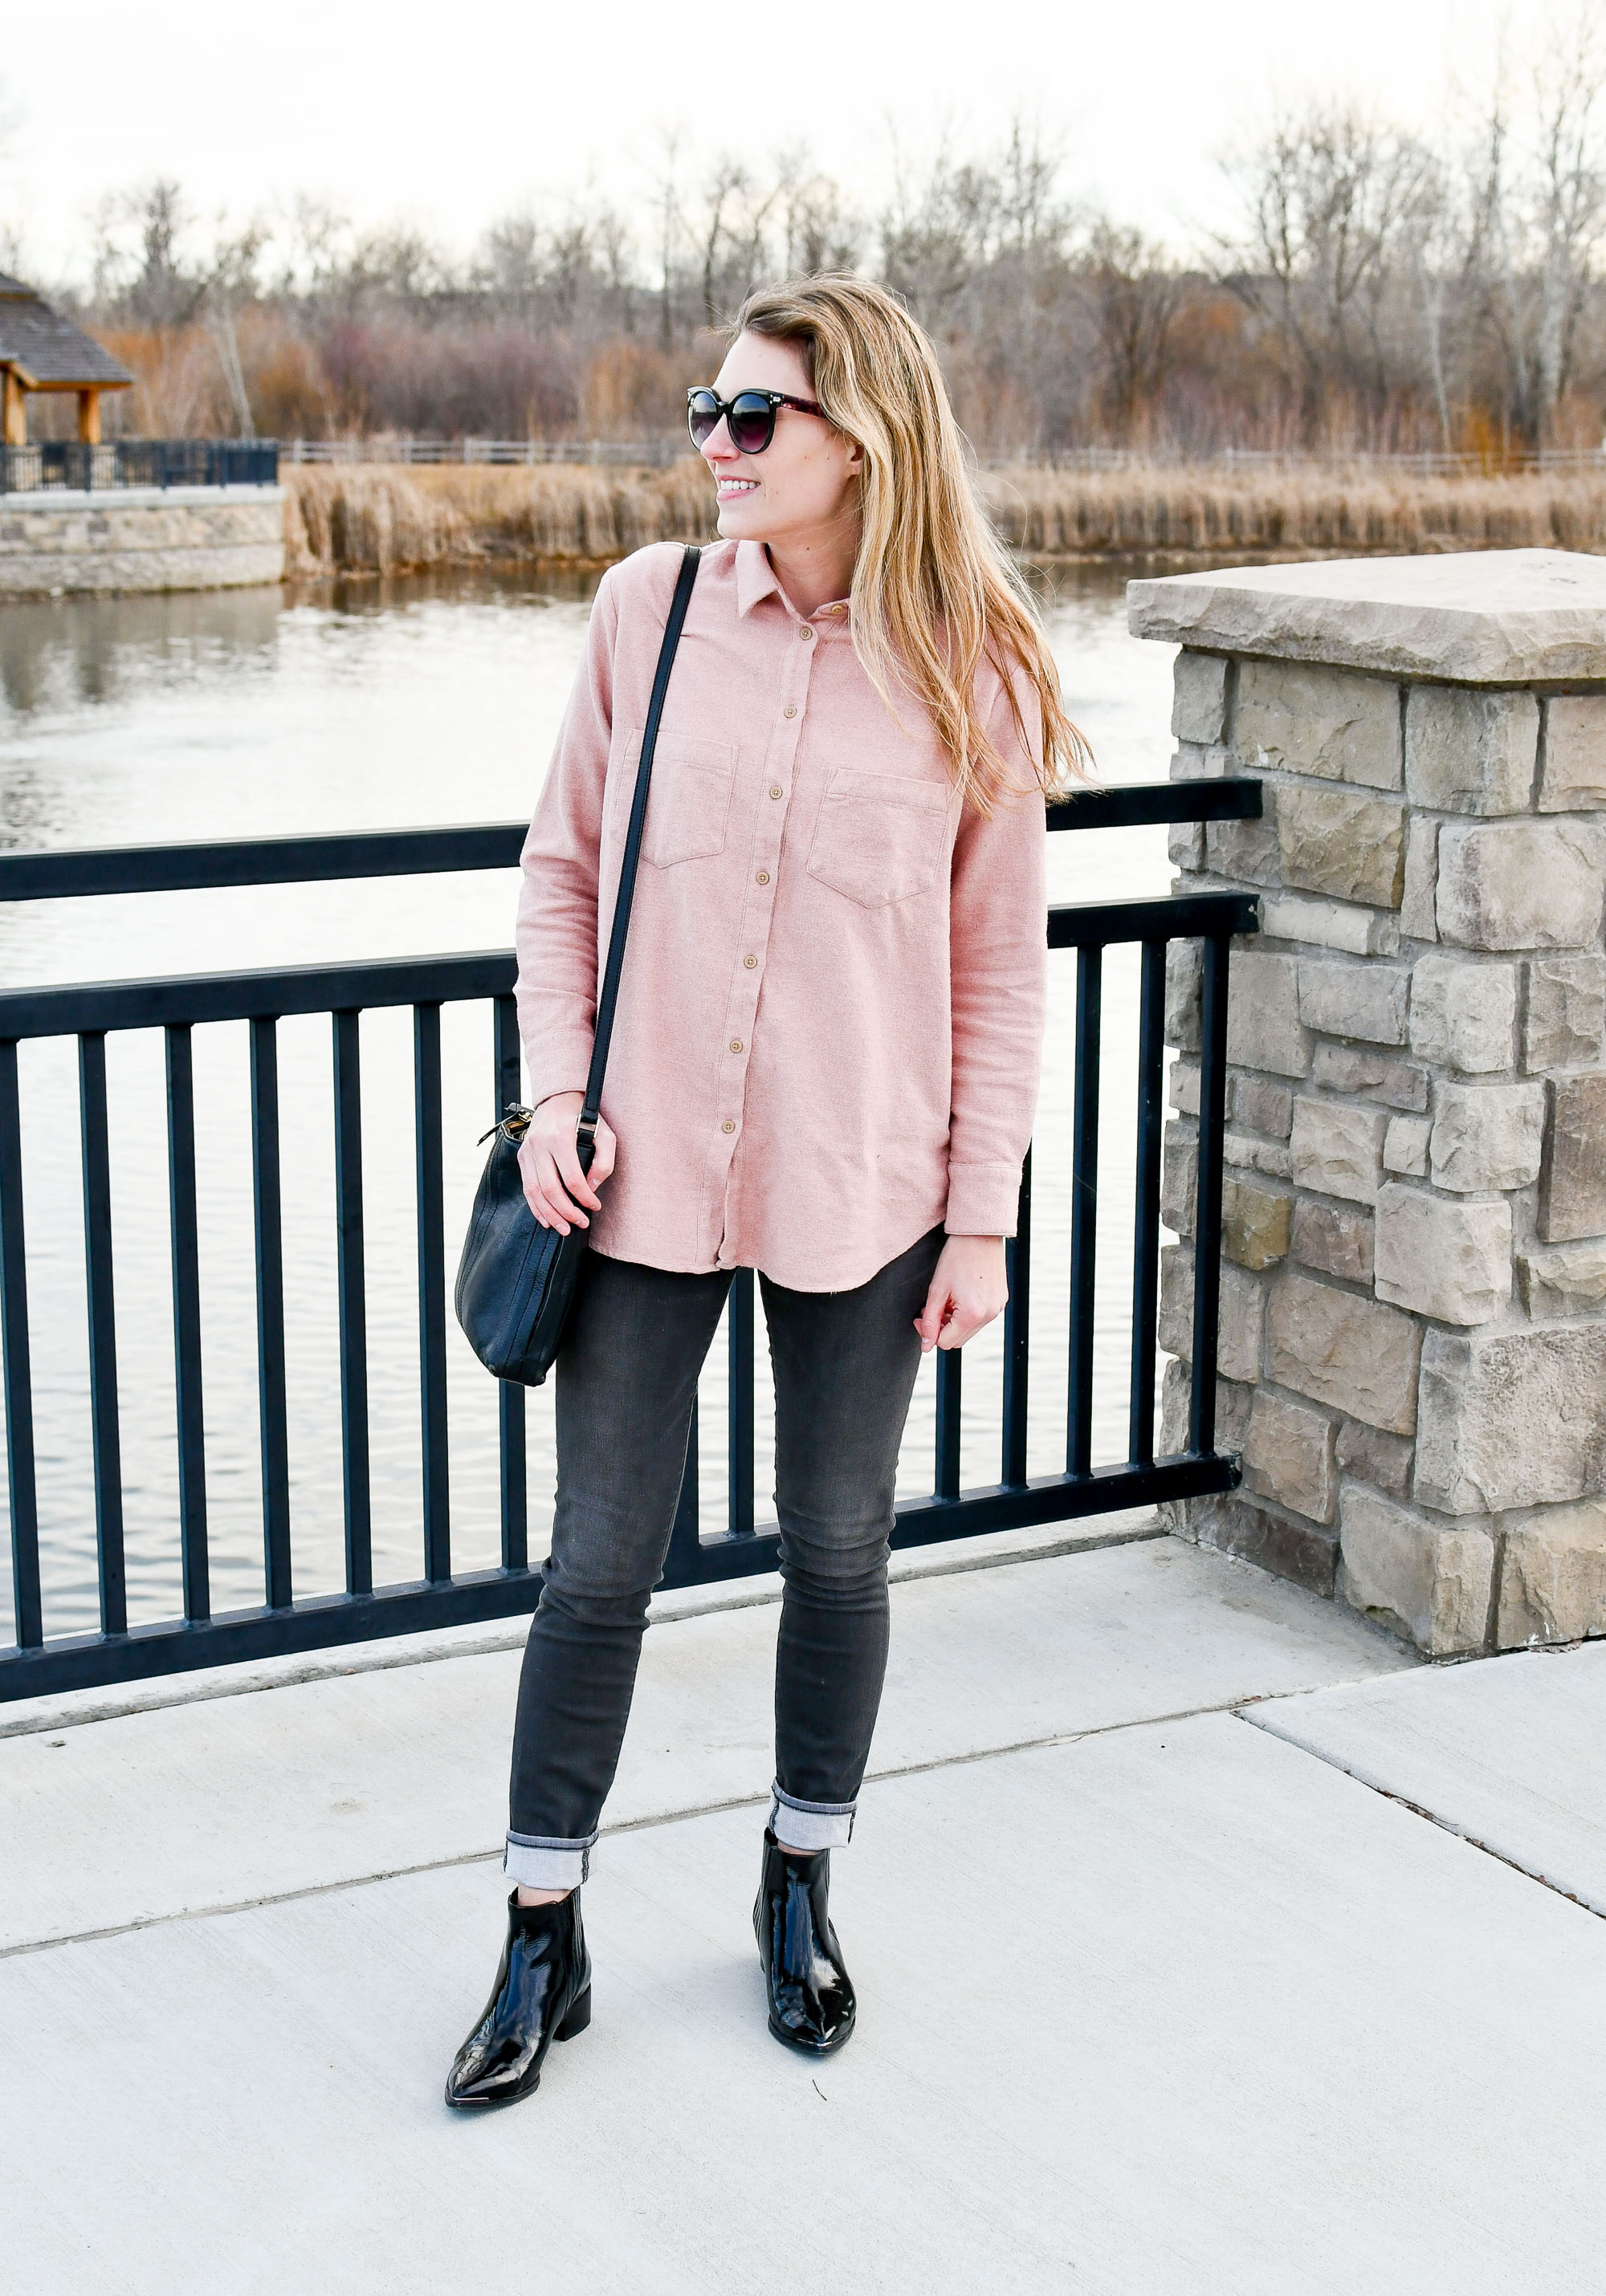 Favorite outfit: Brunch in blush — Cotton Cashmere Cat Hair